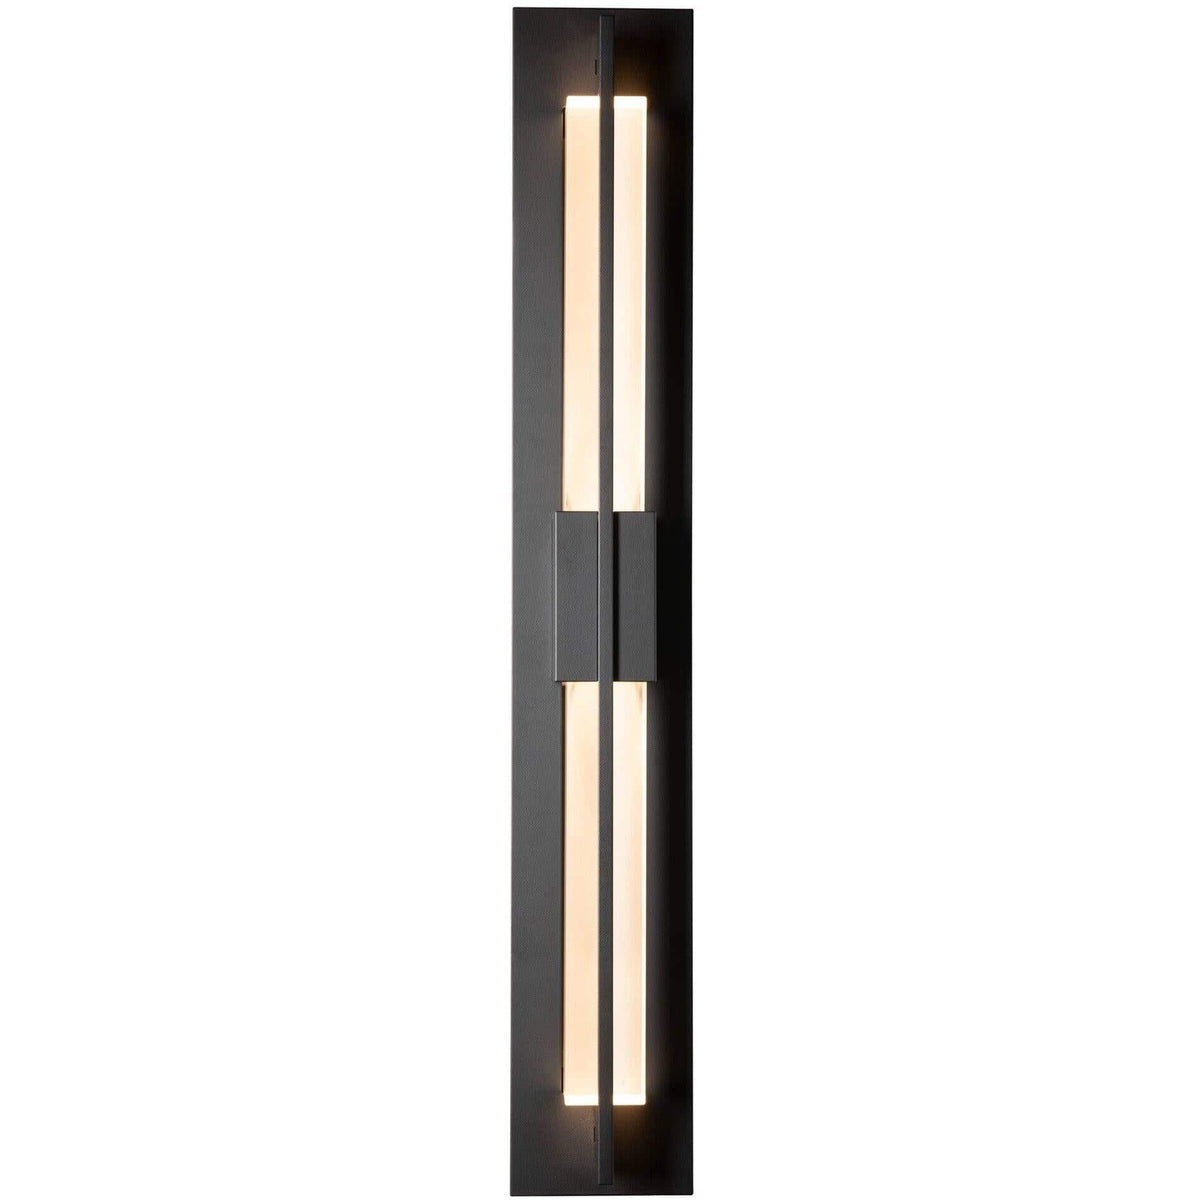 Hubbardton Forge - Axis 31-Inch LED Outdoor Wall Sconce - 306420-LED-10-ZM0332 | Montreal Lighting & Hardware